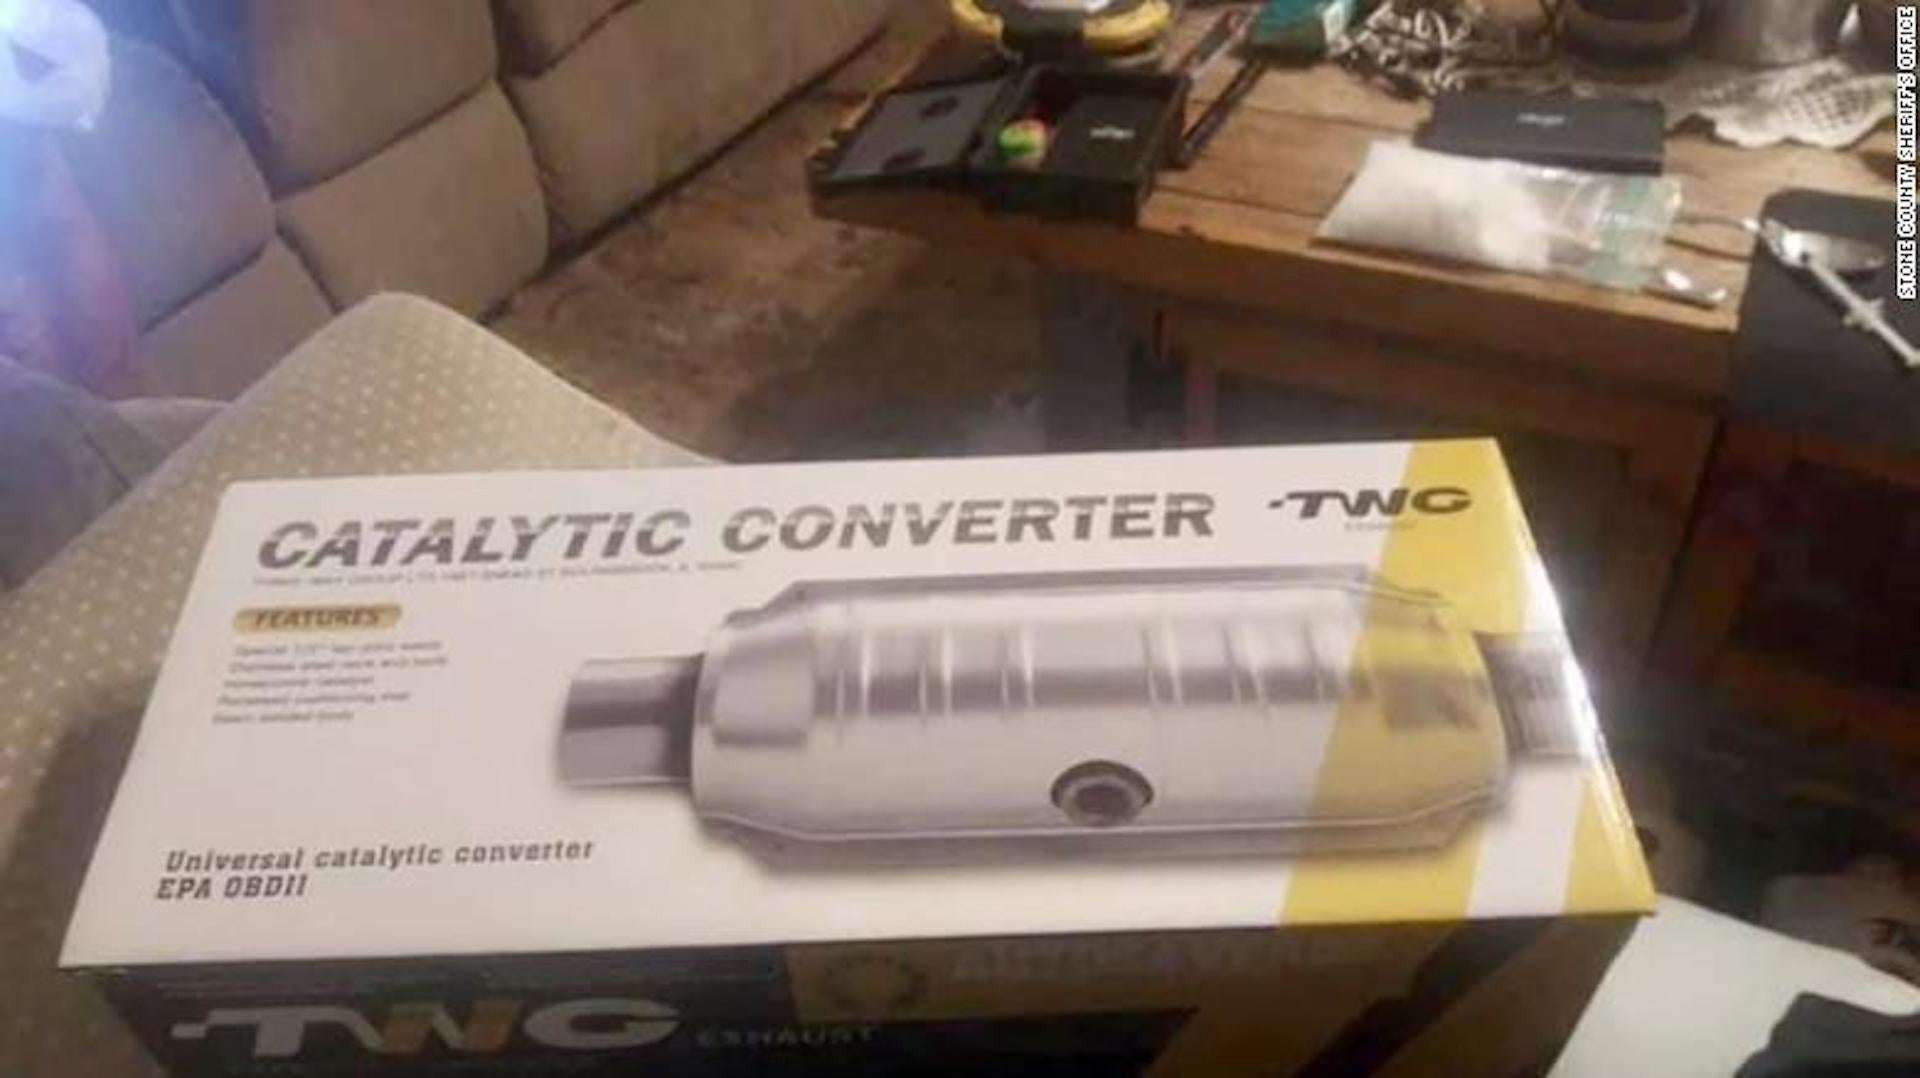 image for Man Selling Catalytic Converter on Facebook Busted by Cops Over Alleged Meth in Photo